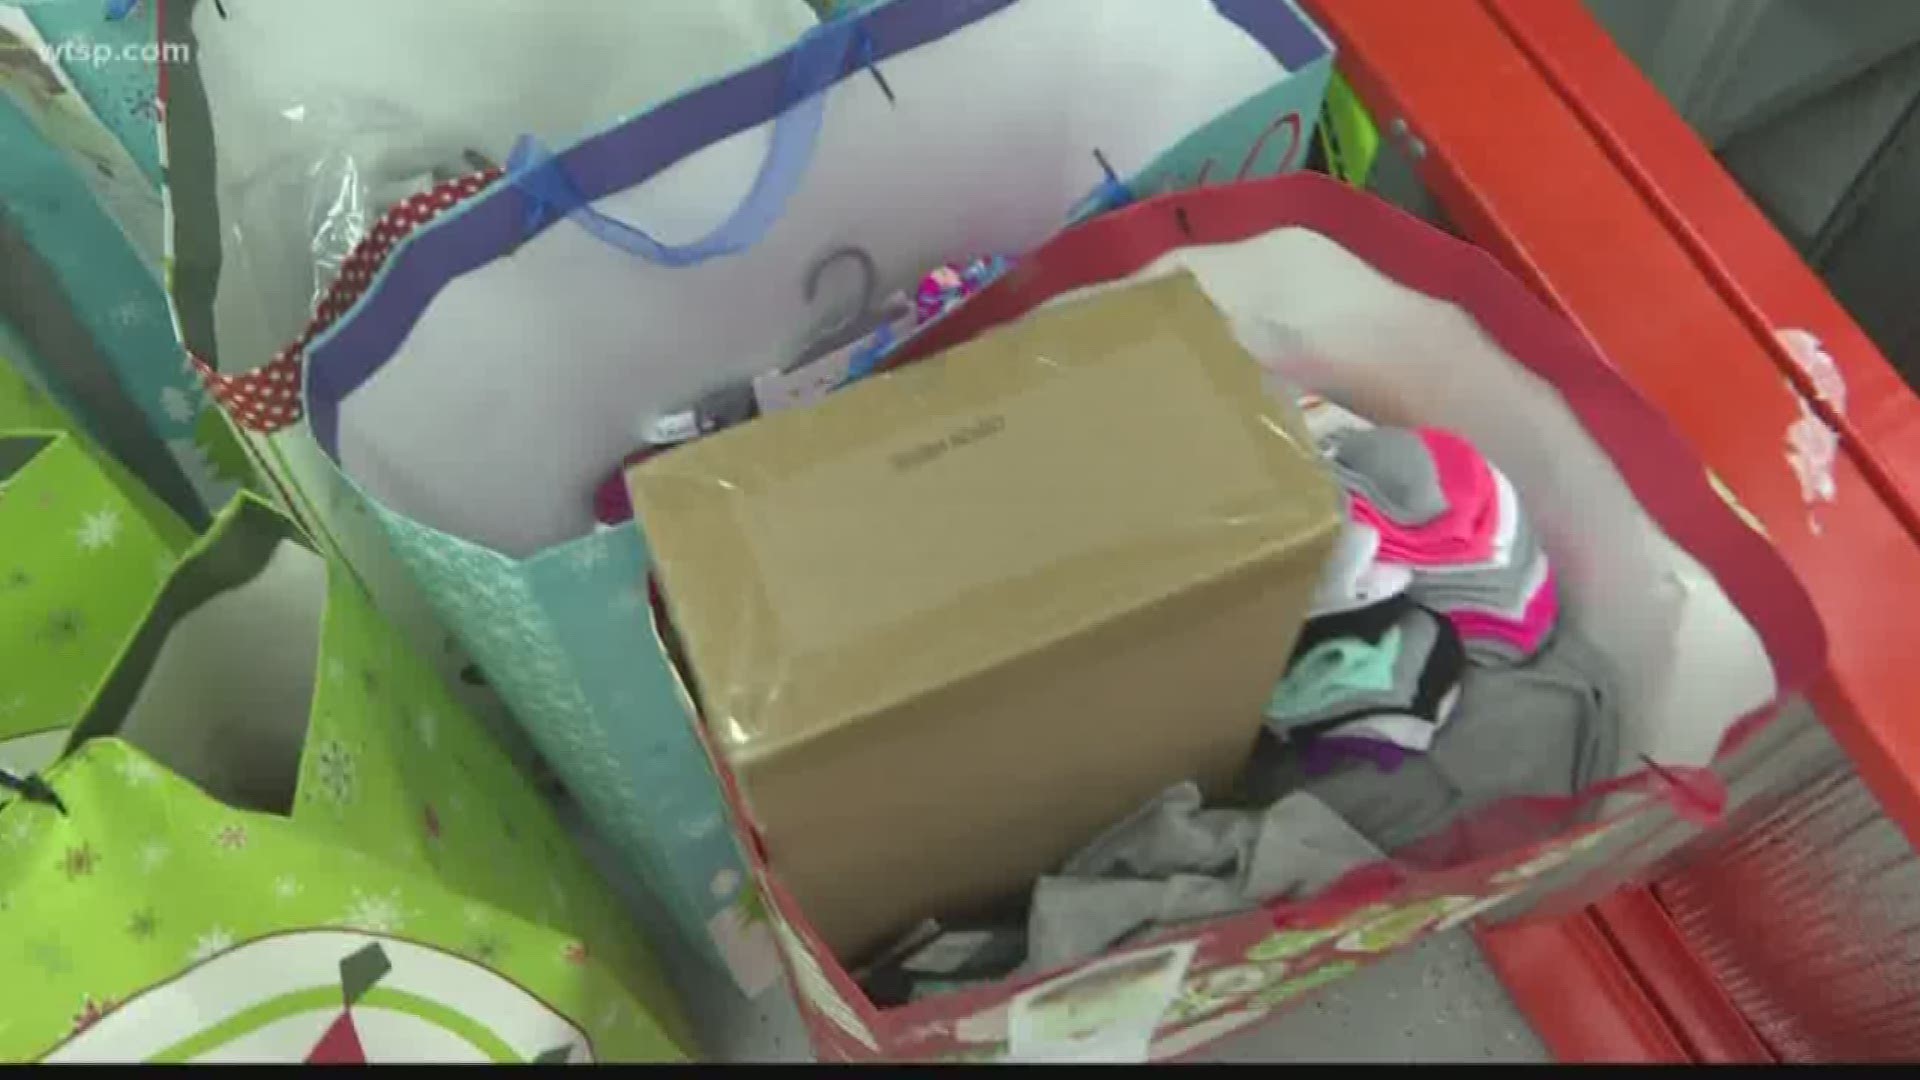 The maintenance company bought and will deliver the gifts as part of the Angel Tree program.